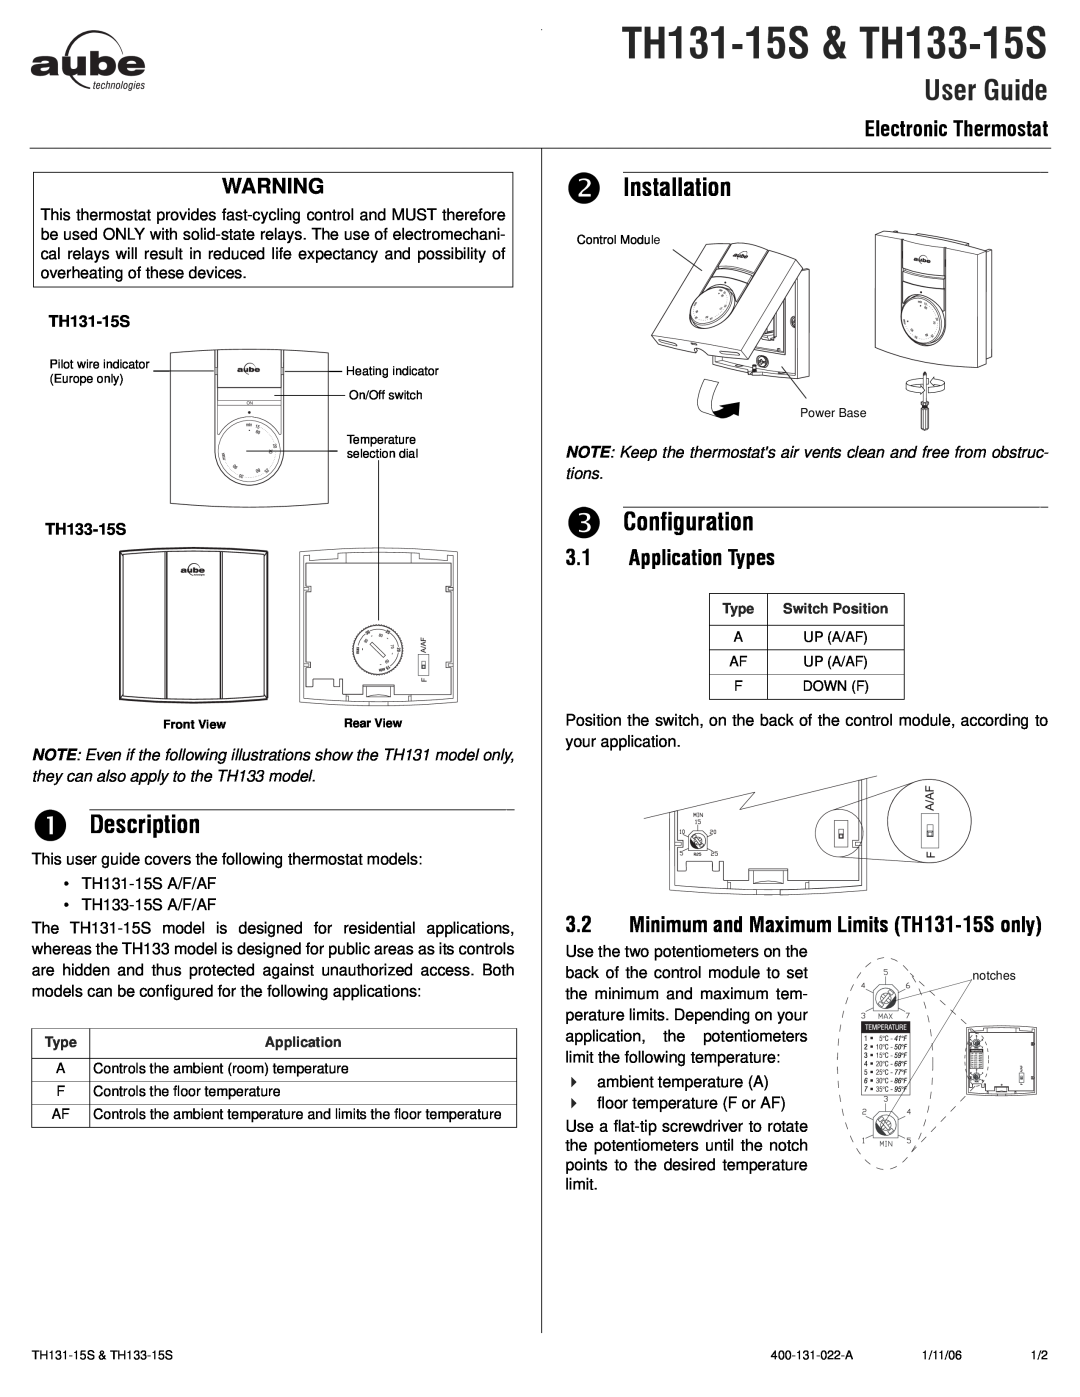 Aube Technologies TH133-15S manual o Installation, n Description, Electronic Thermostat, Application Types, TH131-15S 